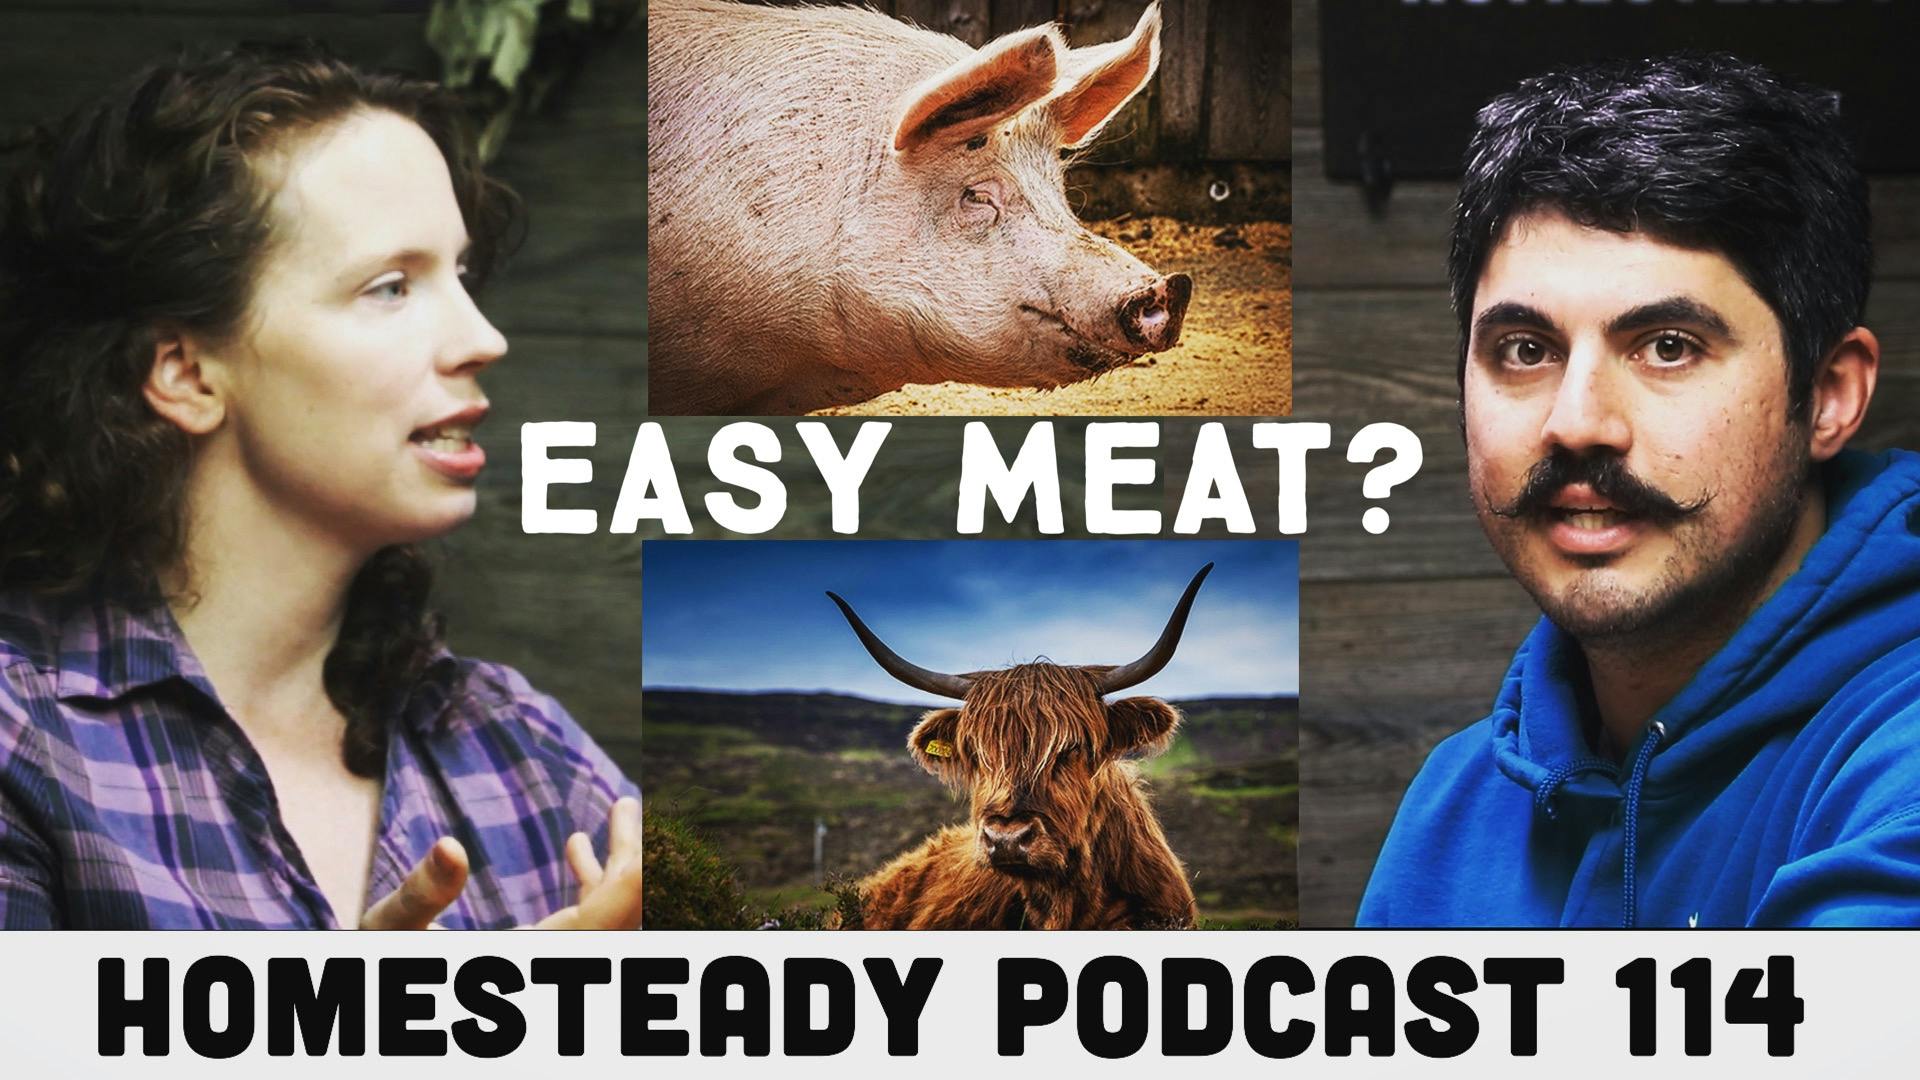 3 EASY MEAT ANIMALS to Raise and Process for BEGINNERS